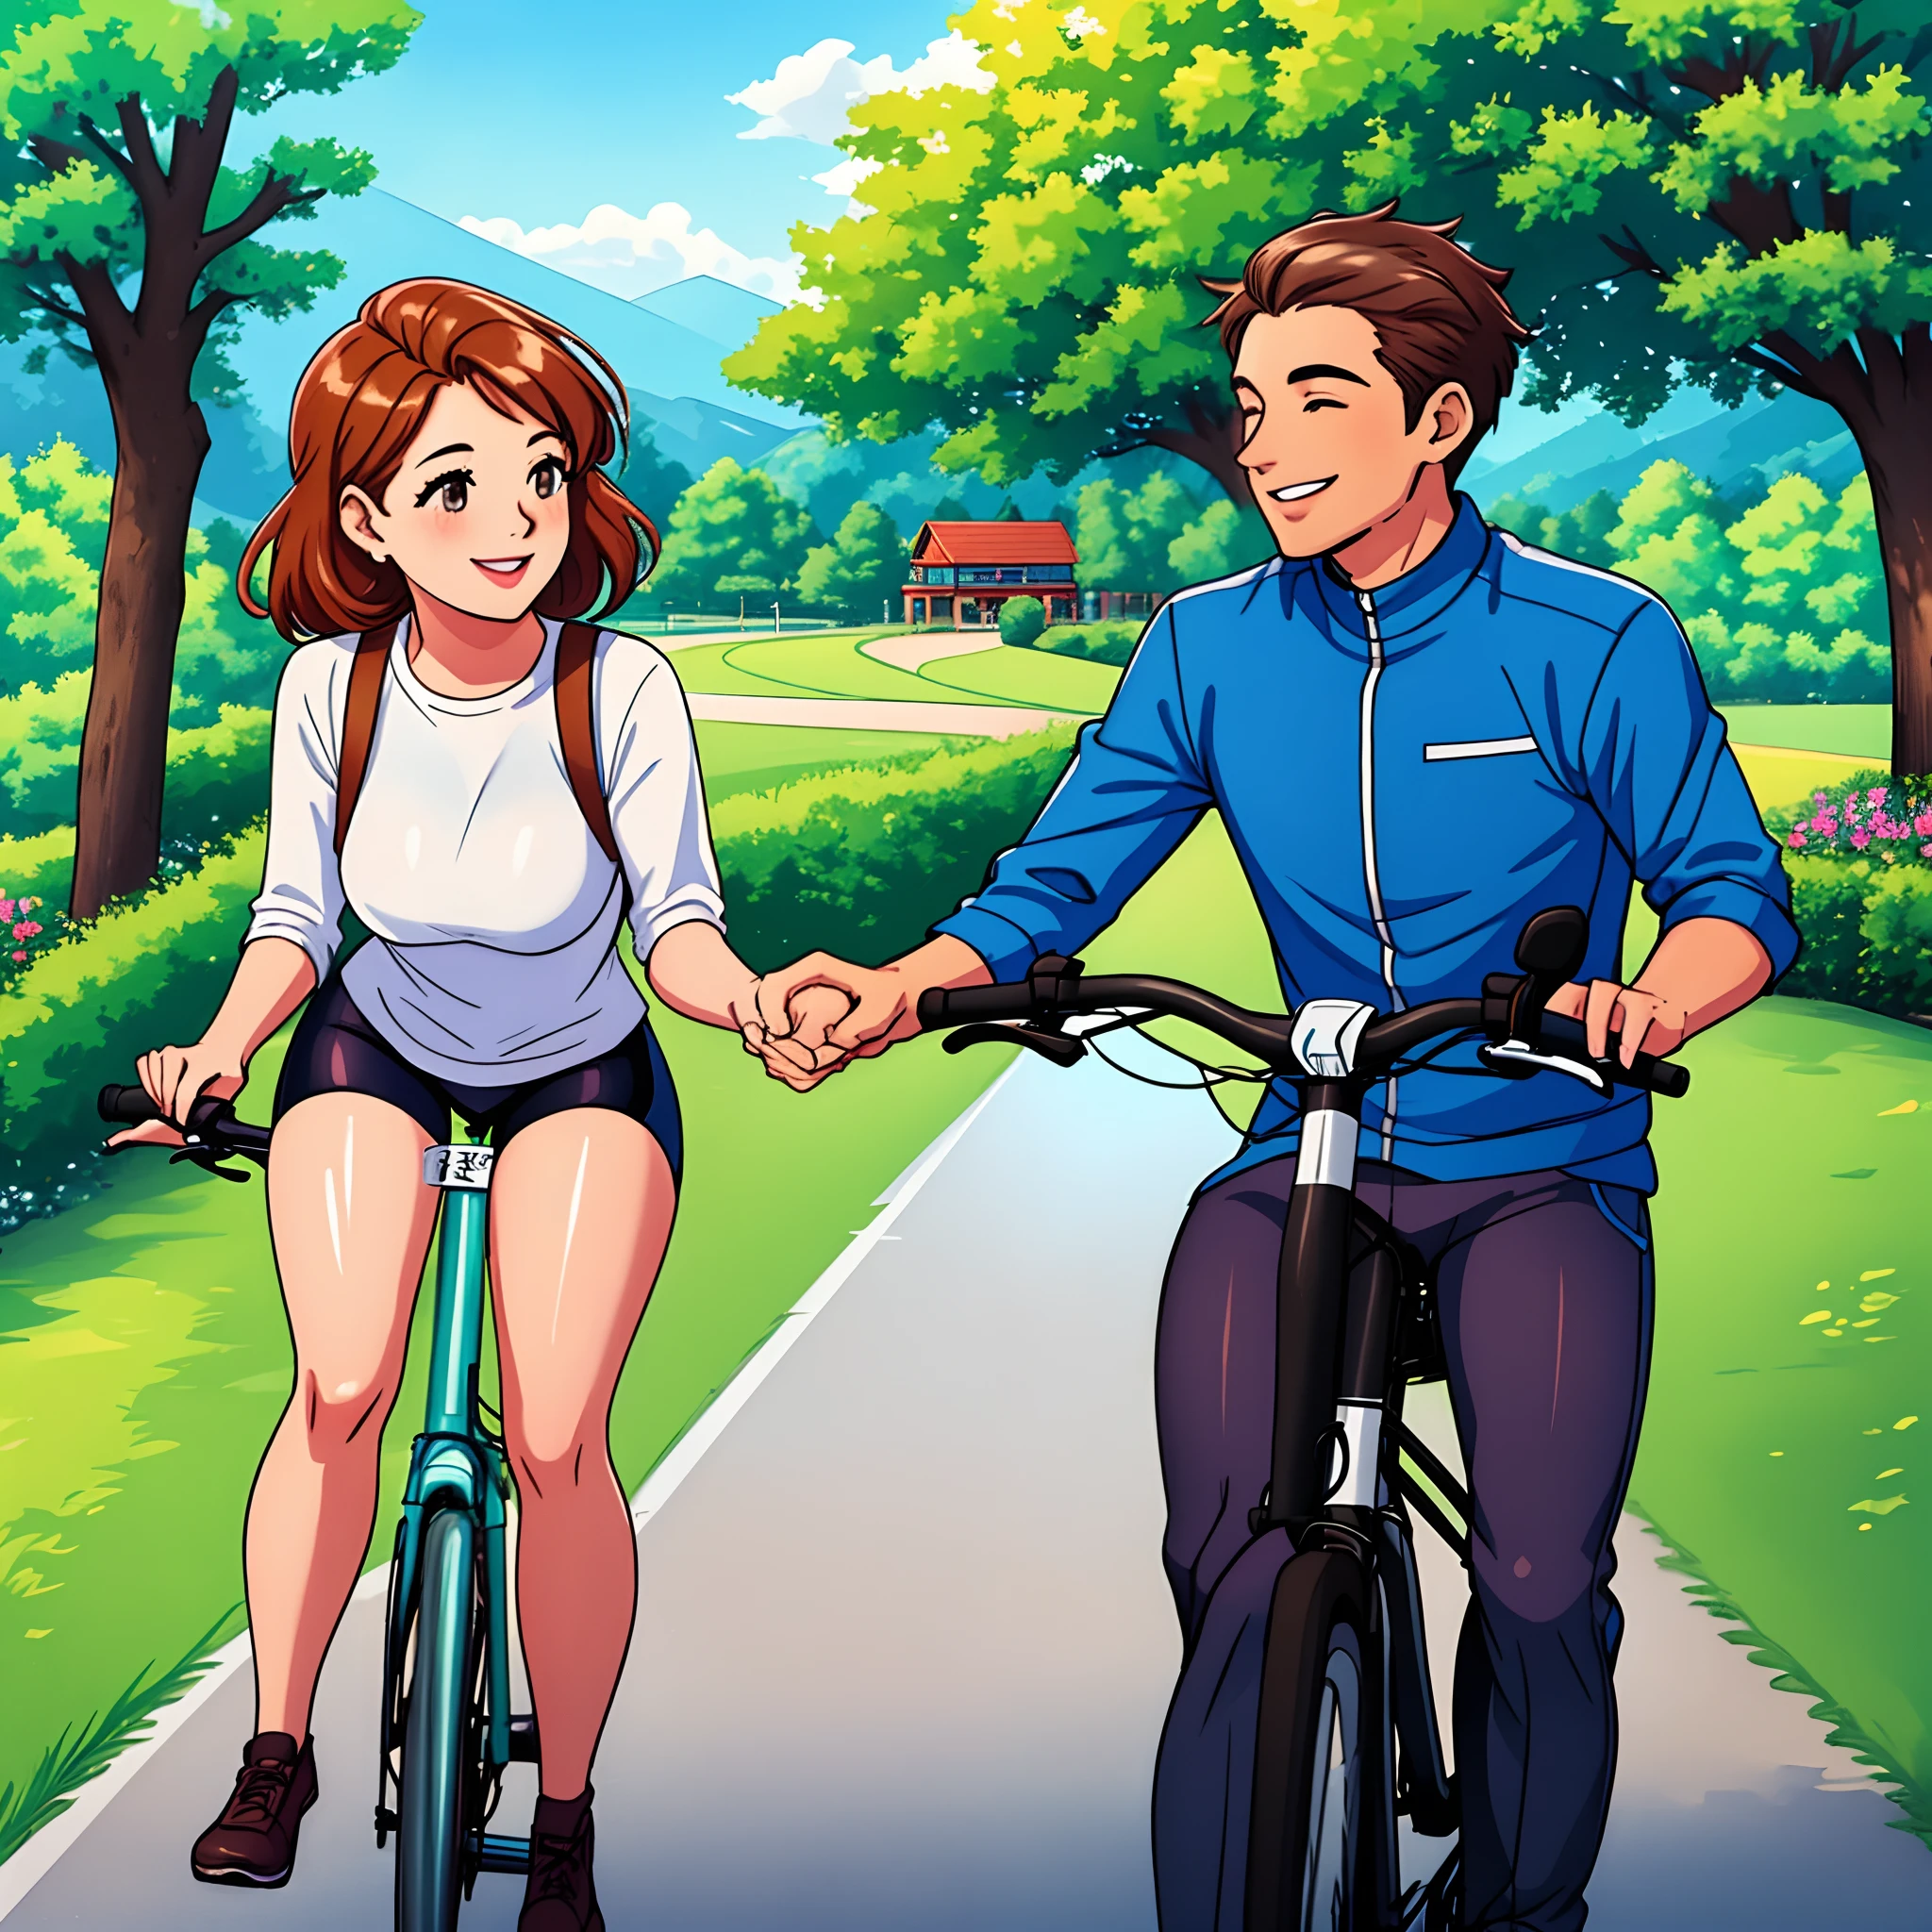 a man and woman riding bicycles in a park holding hands - stock image, stock photo, recreation, in a scenic background, riding a bike, happy couple, stock footage, lovely couple, alamy stock photo, trending artwork, rides a bike, outdoor, romantic couple, stock photography, cycling!!, tourist destination, taking control while smiling, looks smart, outdoors